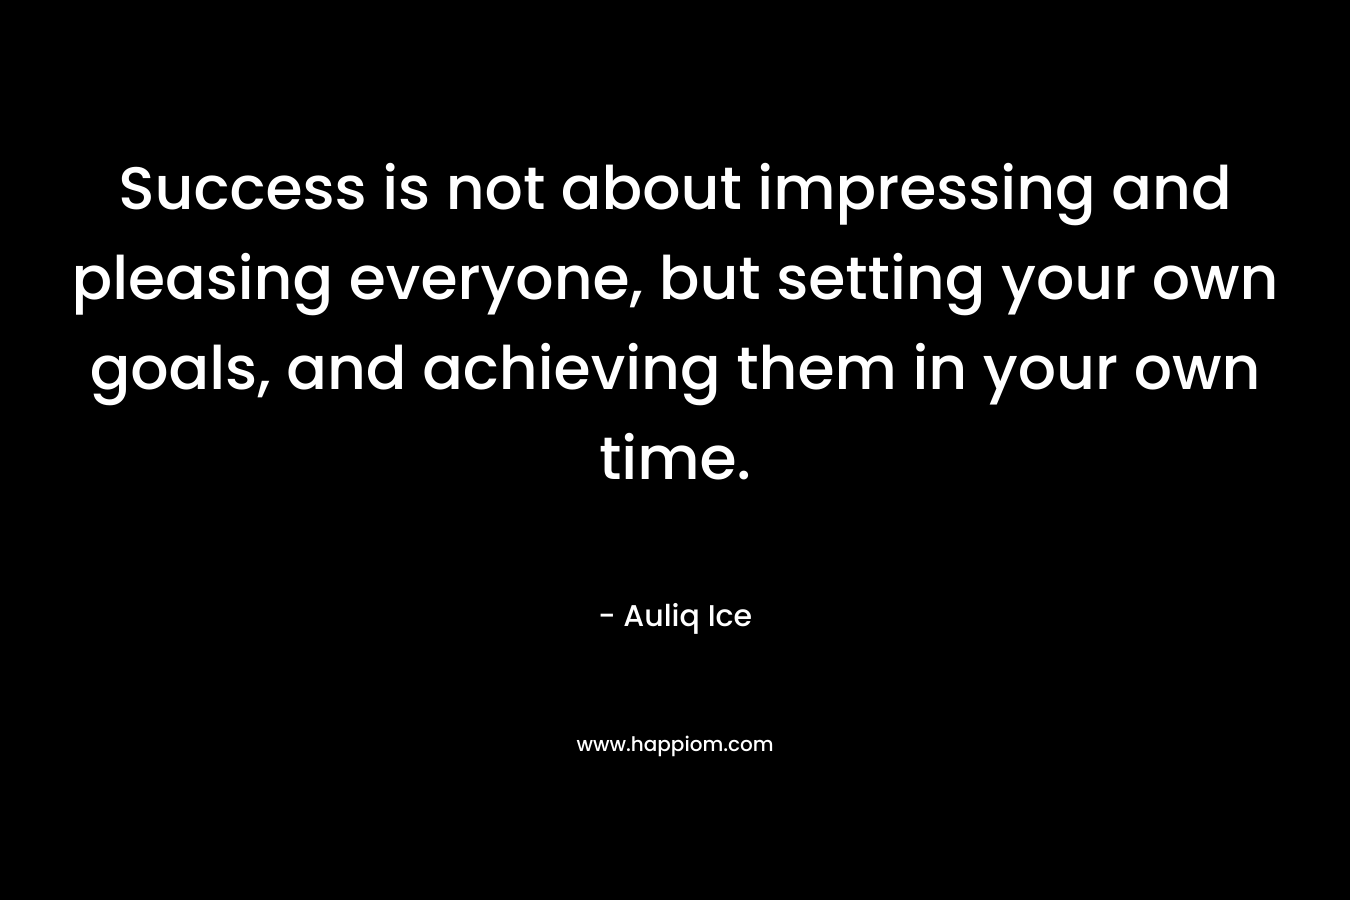 Success is not about impressing and pleasing everyone, but setting your own goals, and achieving them in your own time.